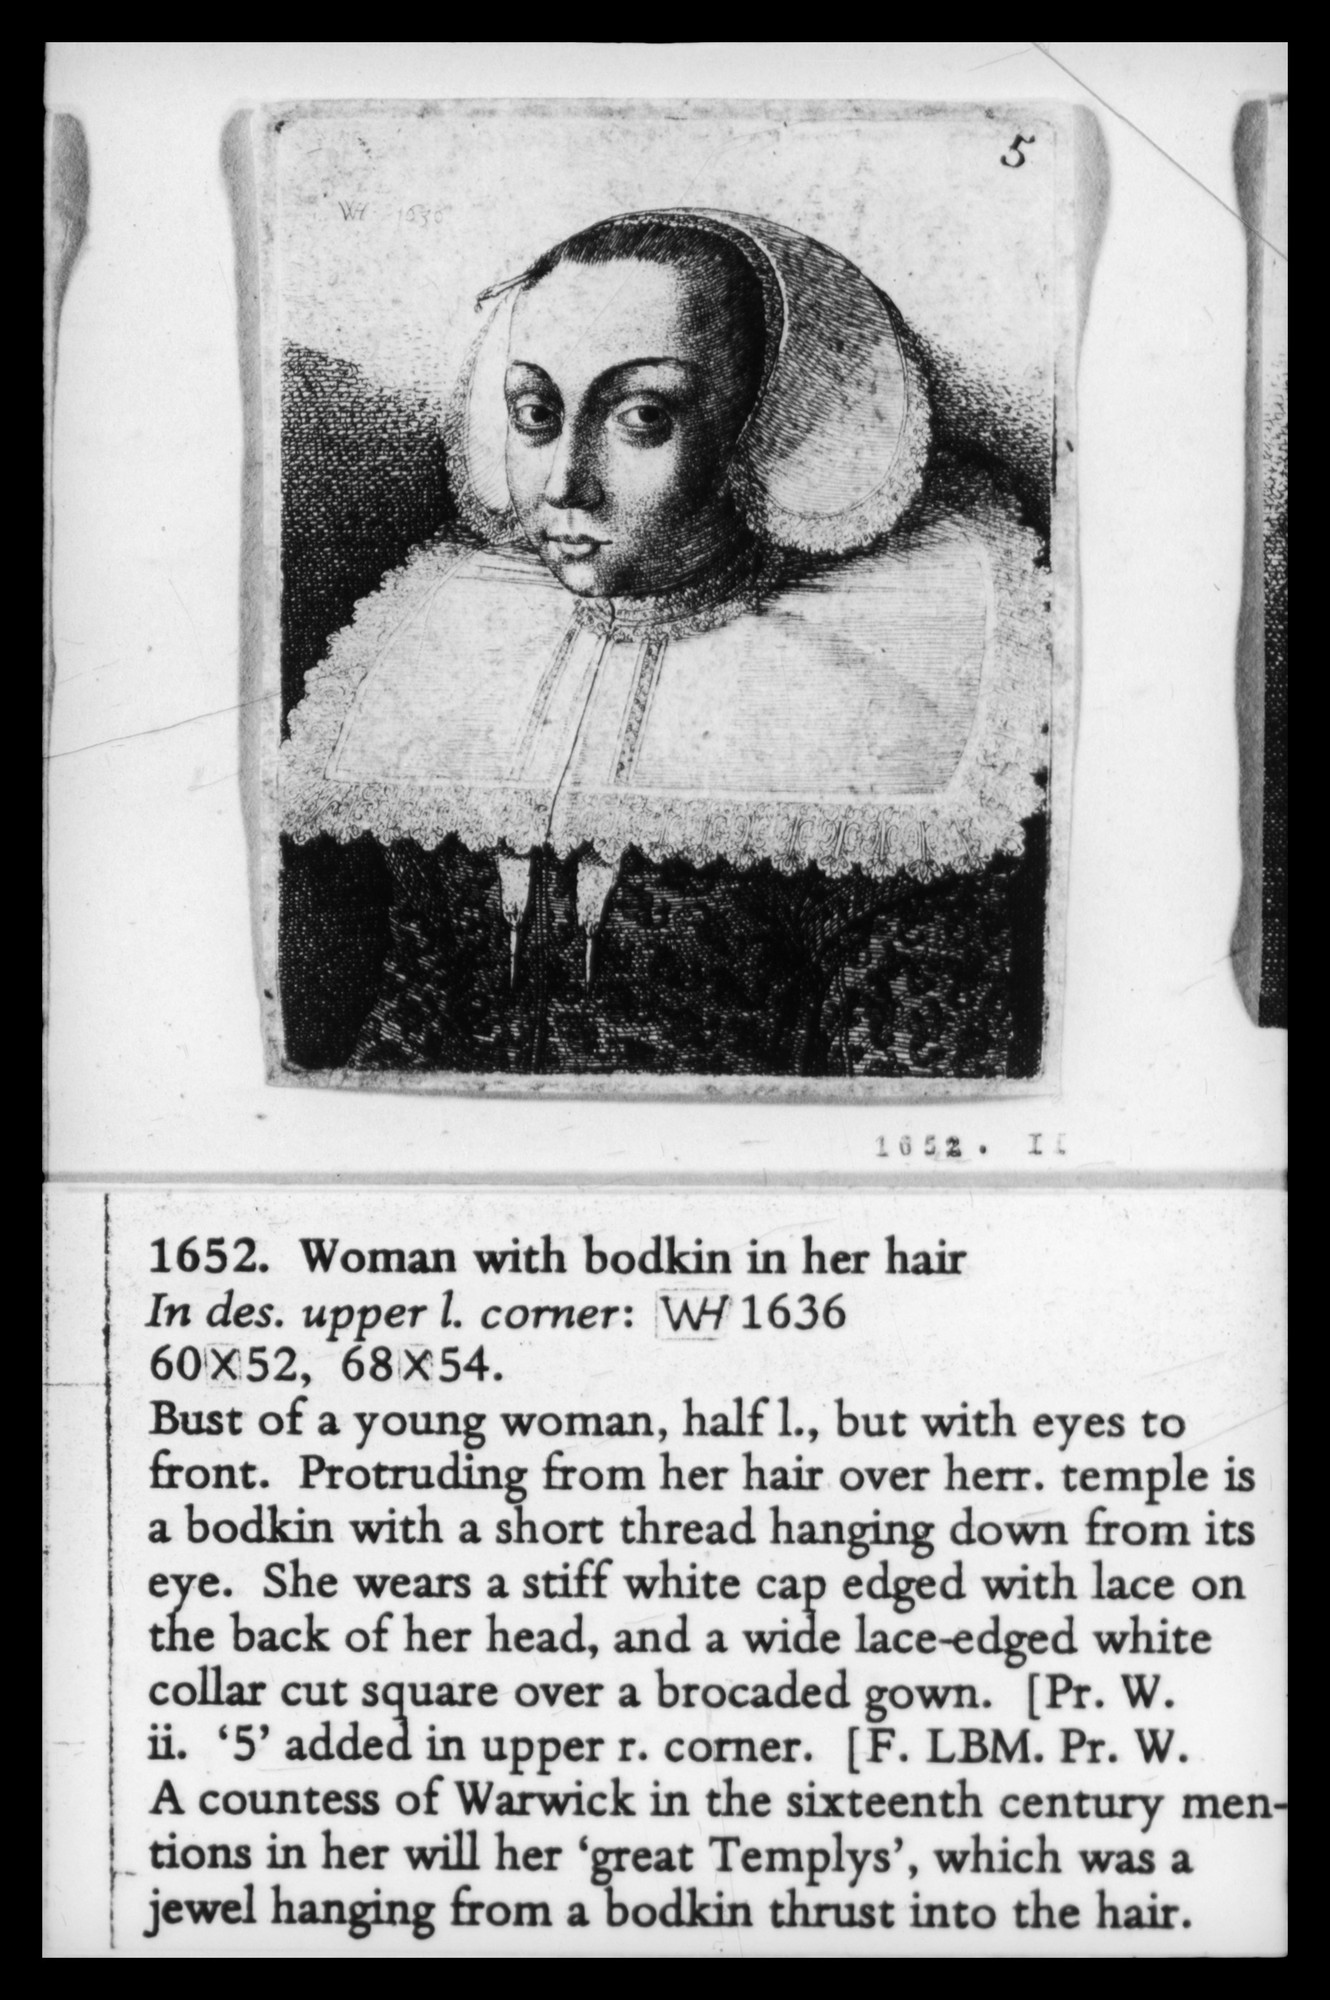 Woman with a Bodkin in Her Hair Wenceslaus Hollar, 1636, Royal Collection UK, RCIN 803820